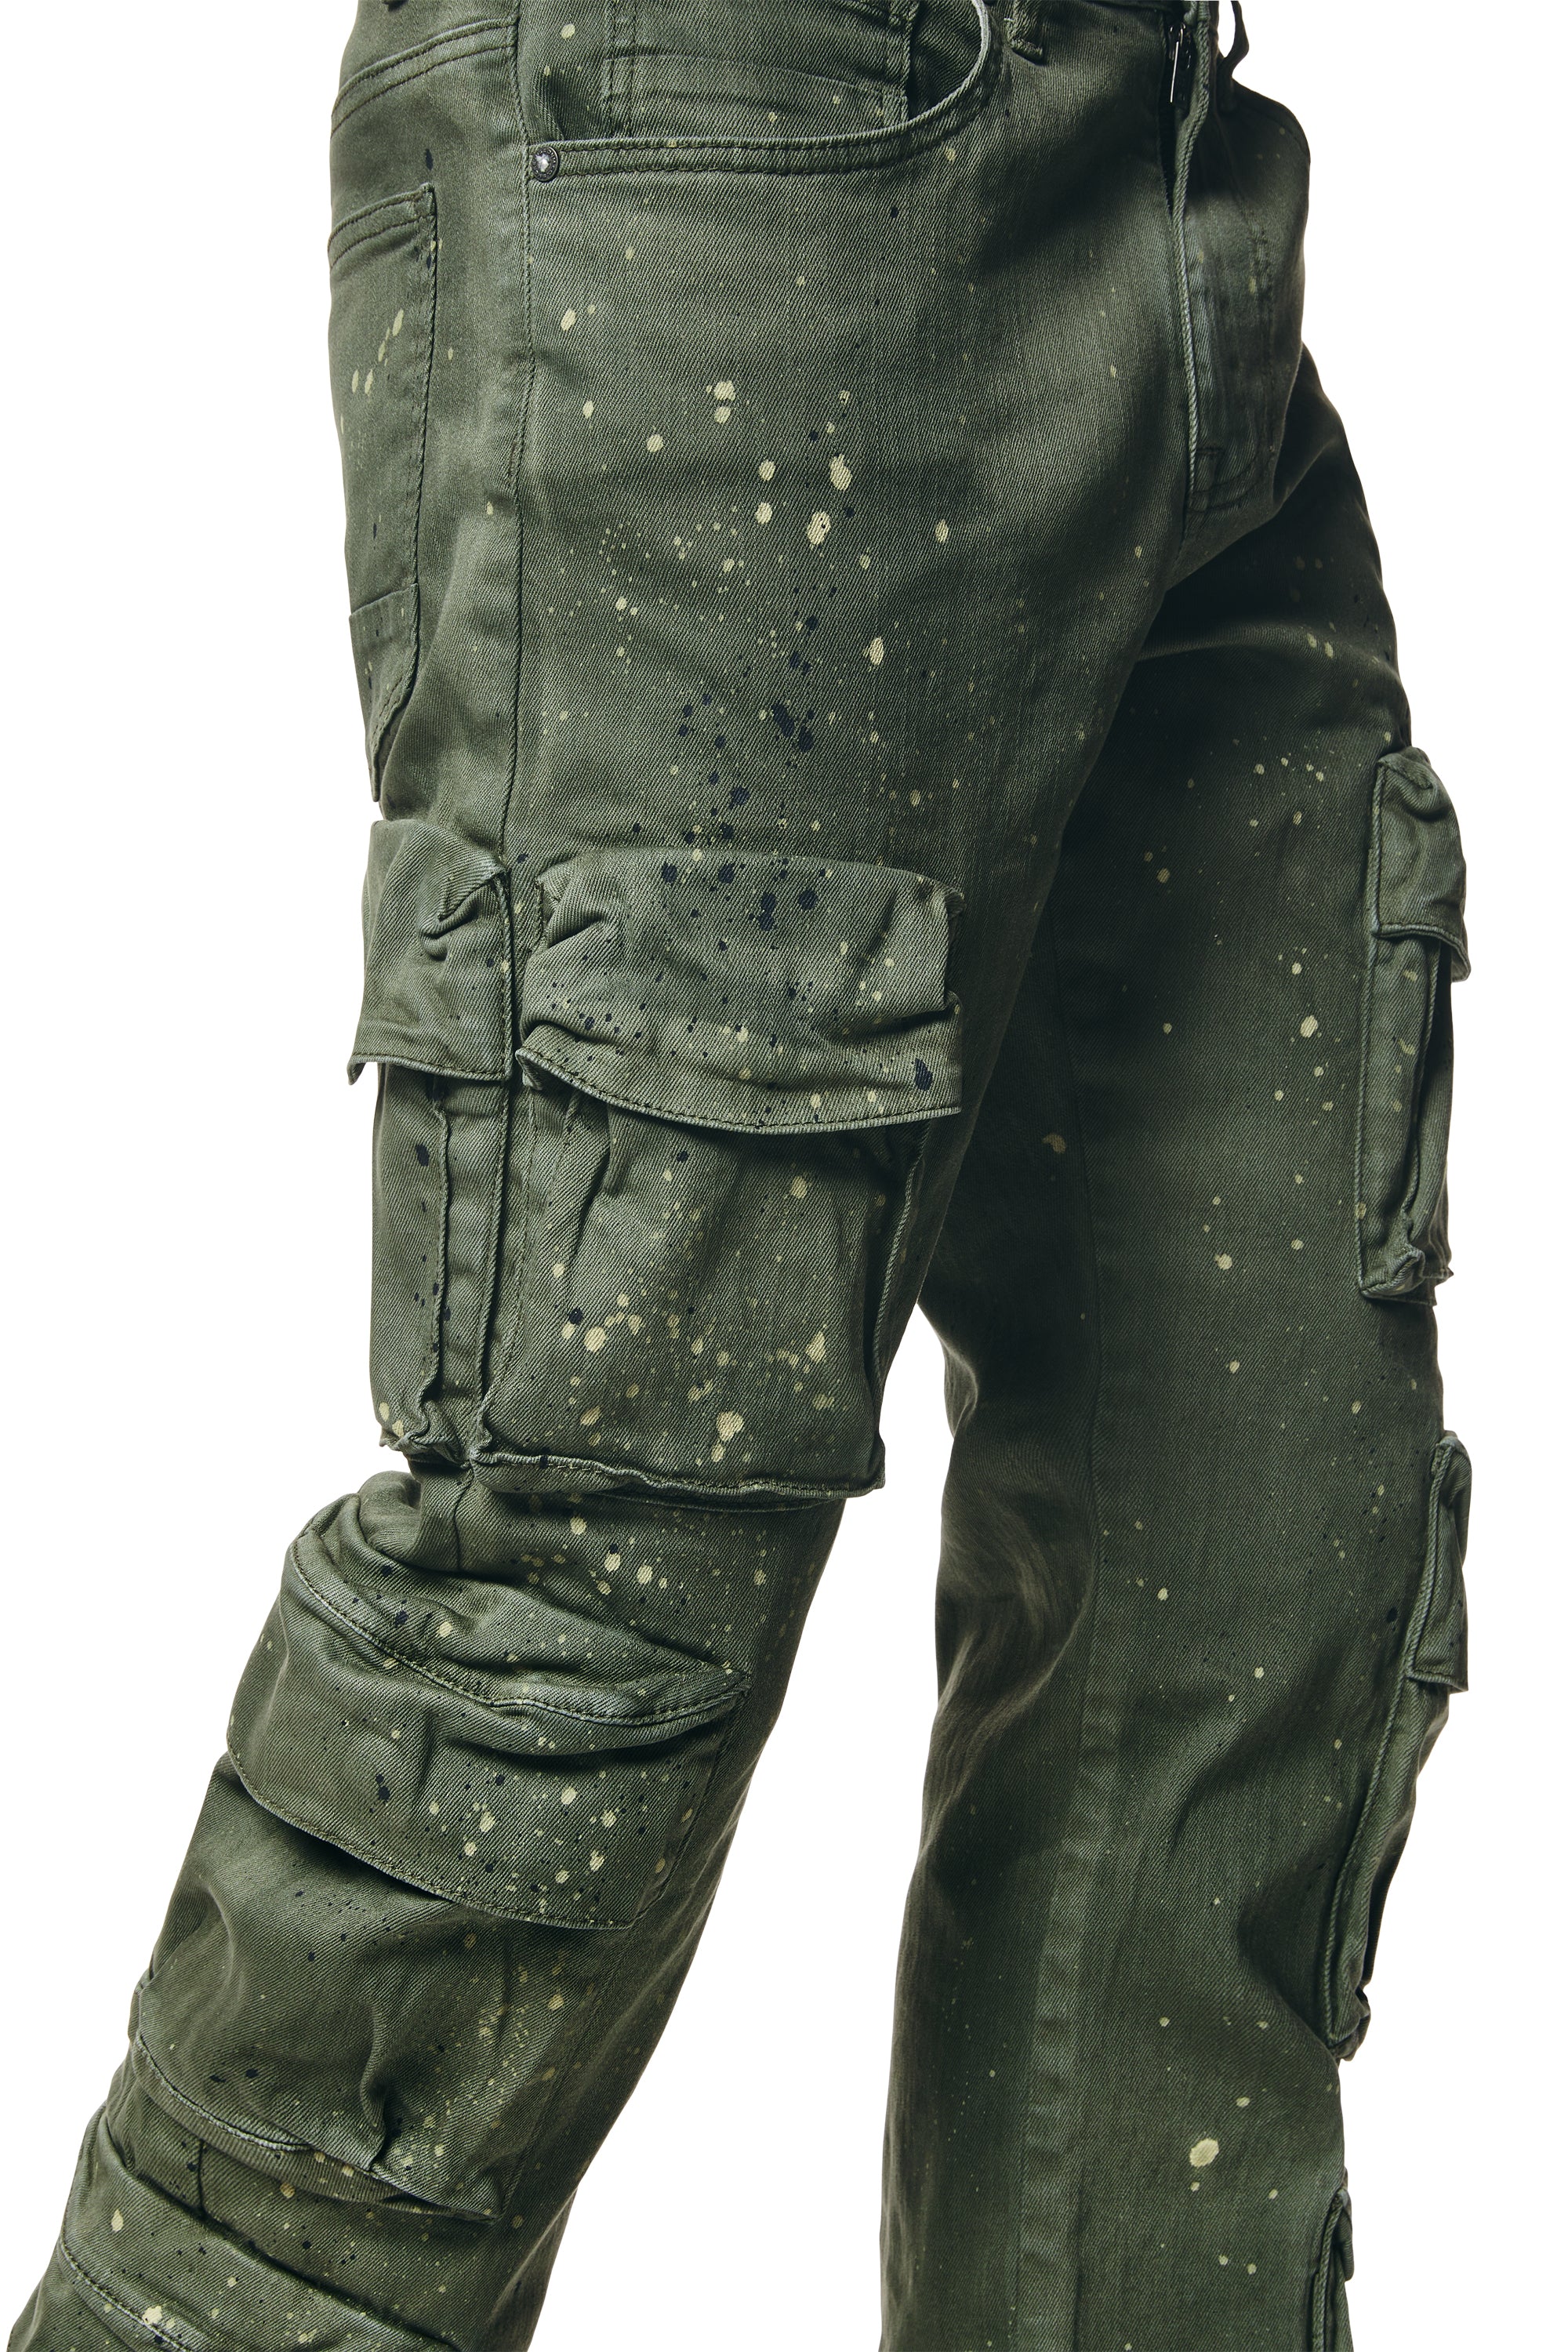 Airbrushed & Heavy Splattered Twill Pants - Vintage Army